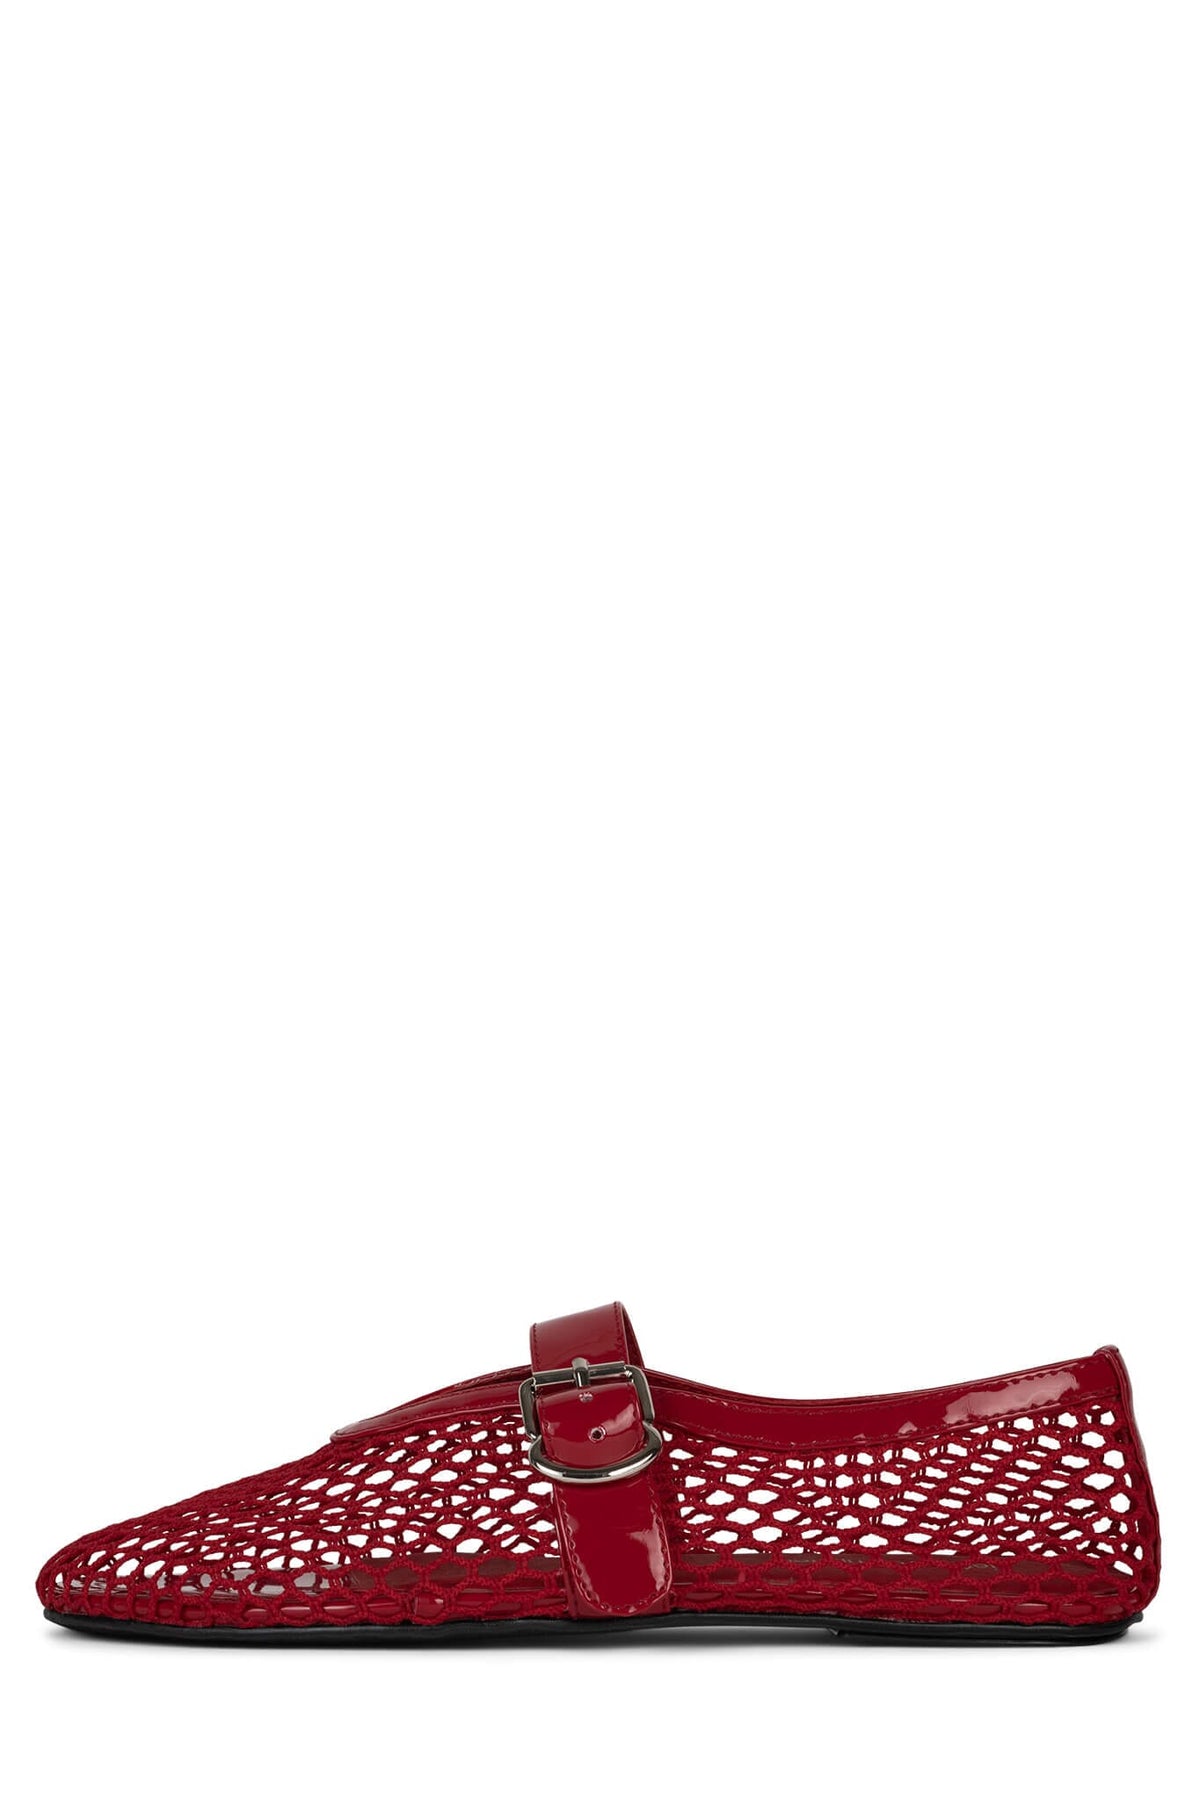 SHELLY-LS2 Mesh Mary-Jane Flats Jeffrey Campbell Red Patent Combo Side View